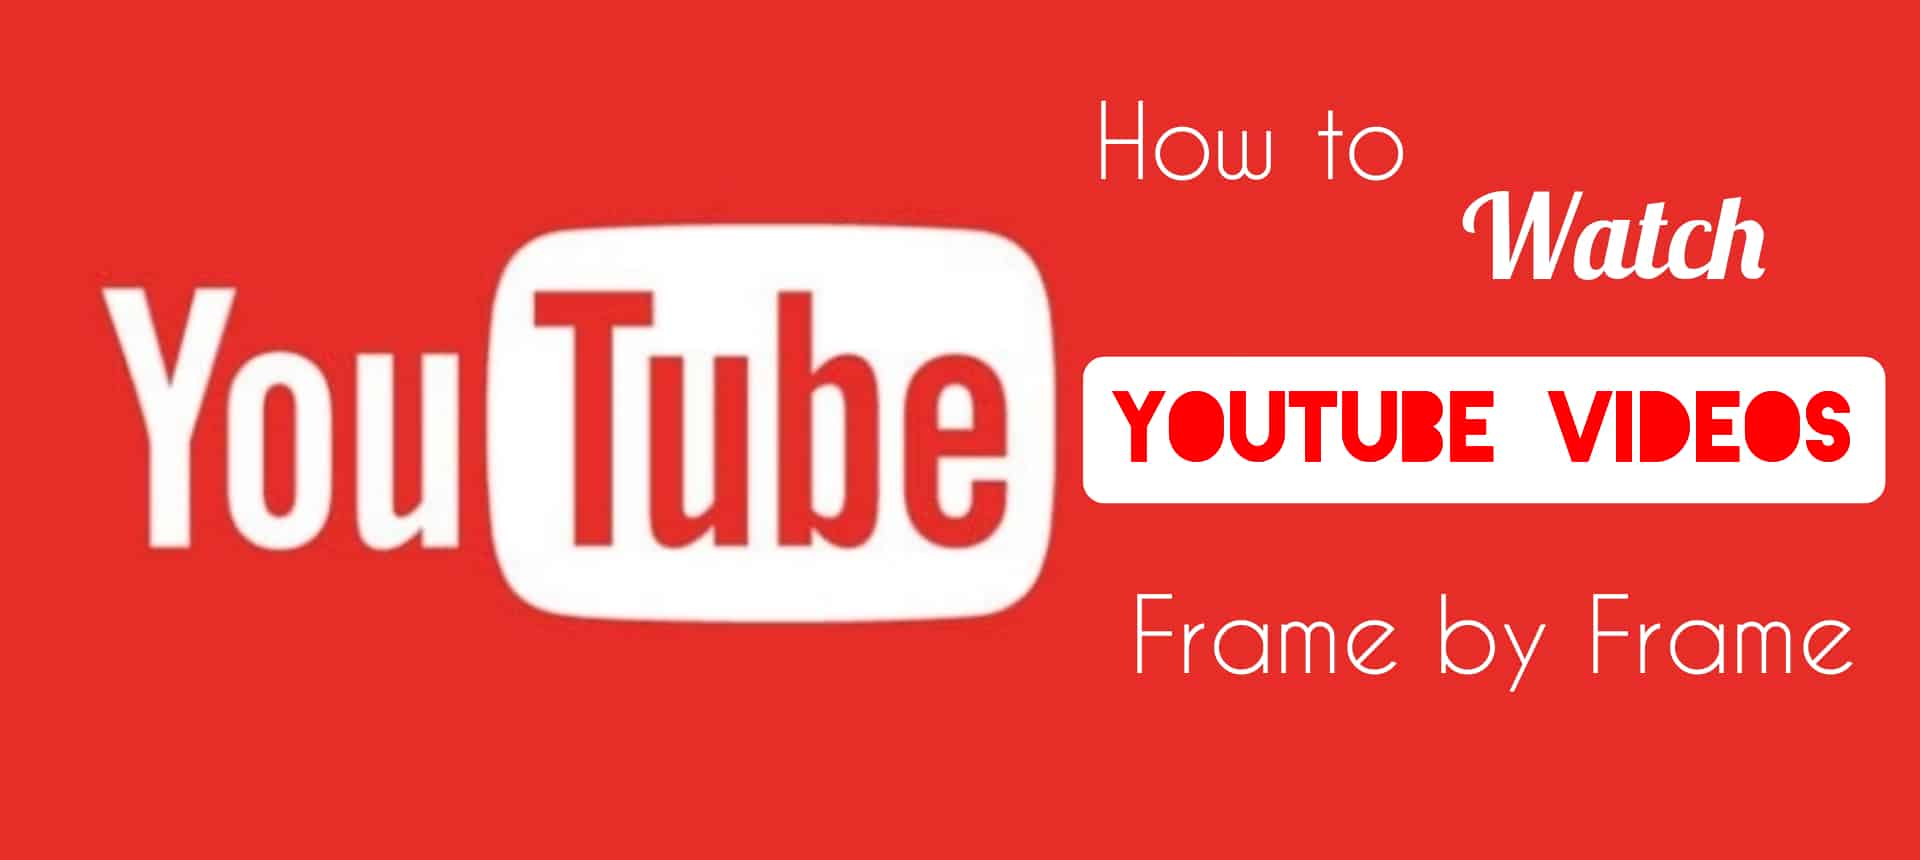 How to Watch YouTube Videos Frame by Frame on PC and Smartphone - AndroidFist